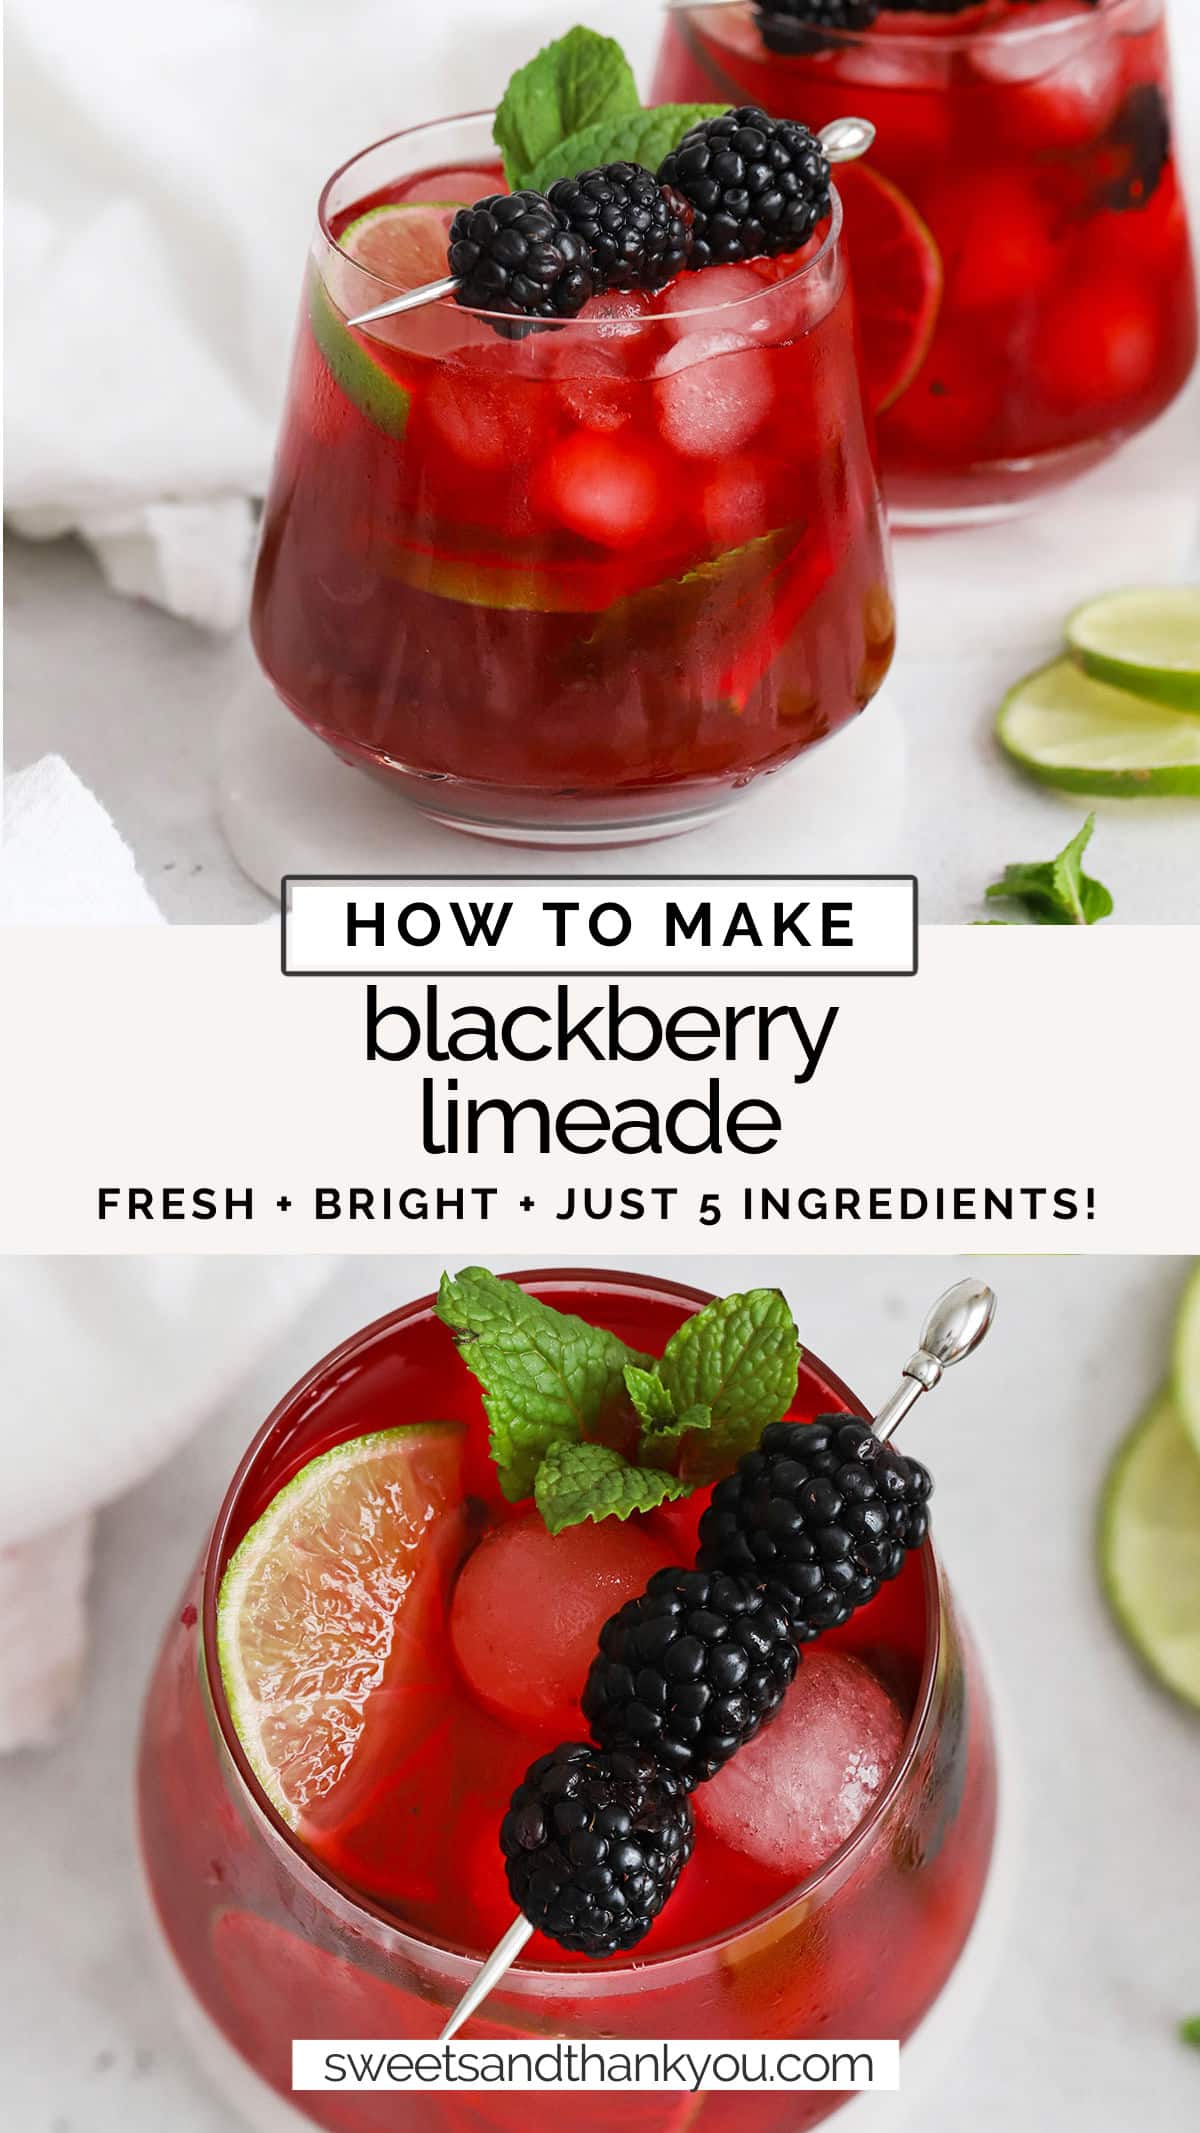 Our easy Blackberry Limeade recipe is the perfect drink to cool off with. You only need 5 ingredients to get started! / blackberry lemonade / homemade blackberry limeade / summer drink / blackberry mocktail / blackberry mojito mocktail / virgin blackberry mojito / 5 ingredient blackberry limeade / berry limeade / spring drink / summer mocktail recipe / blackberry drinks / blackberry recipe / blackberry mocktail recipe /